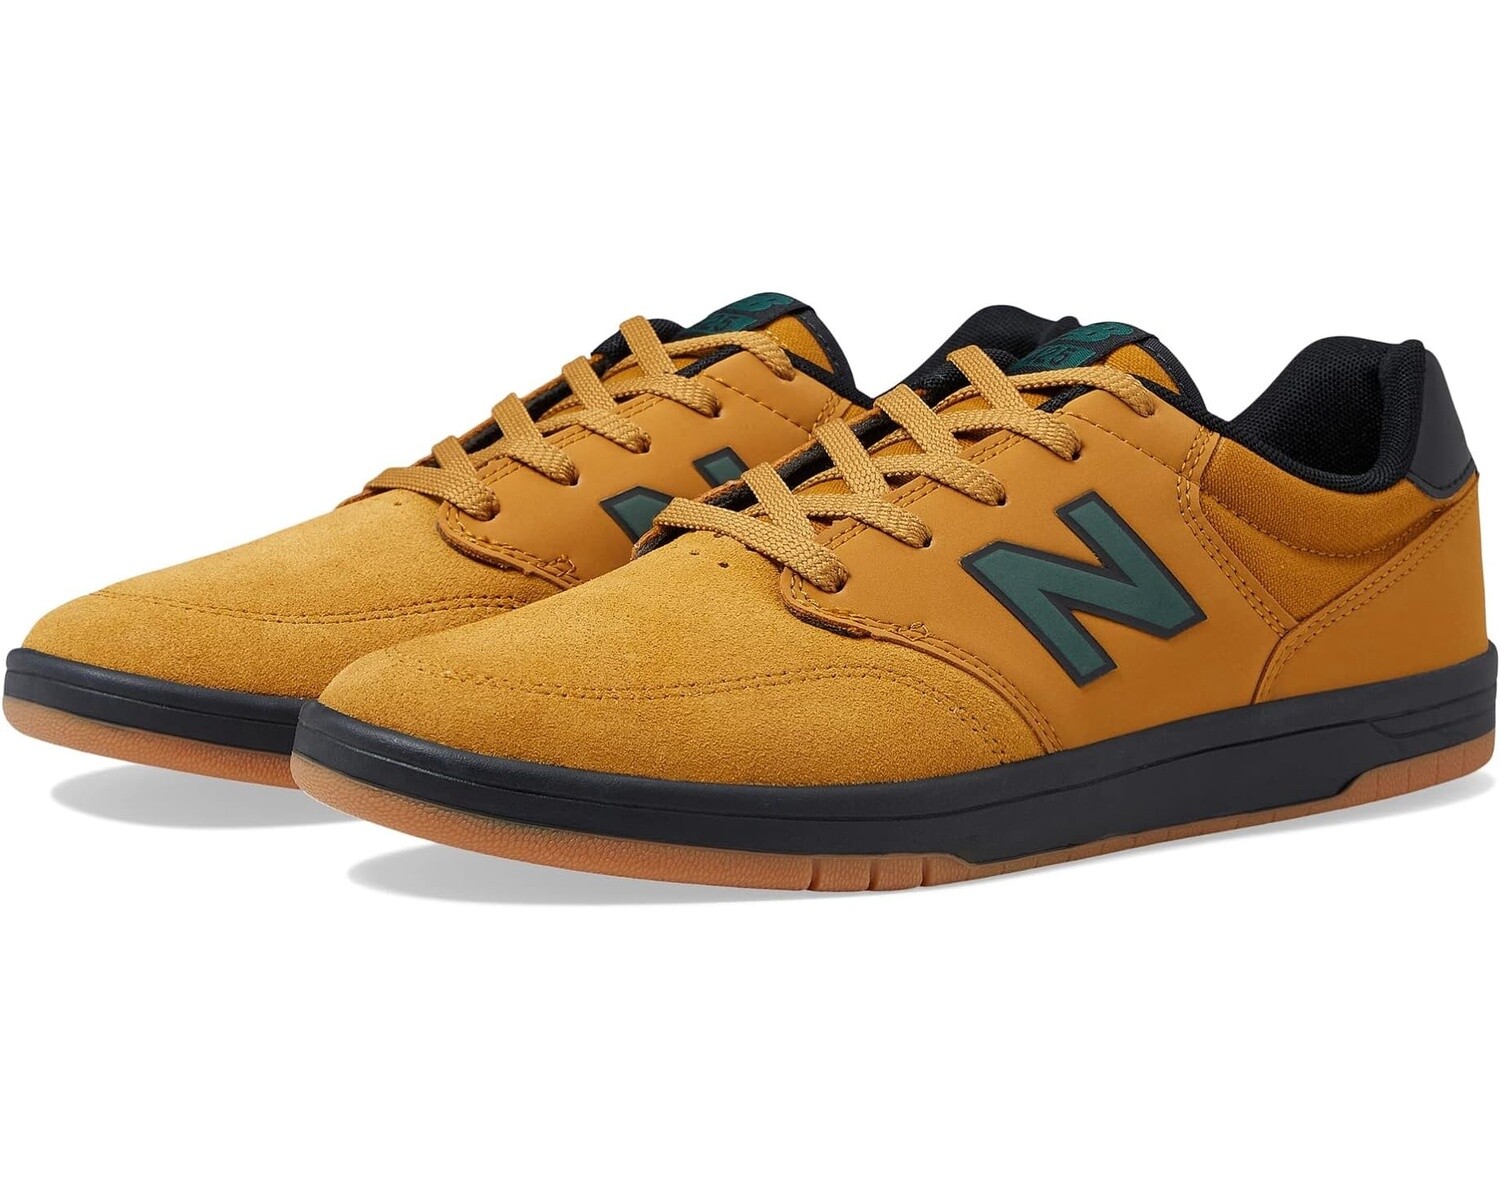 New Balance Numeric 425 ATG Brown Forest Shoes